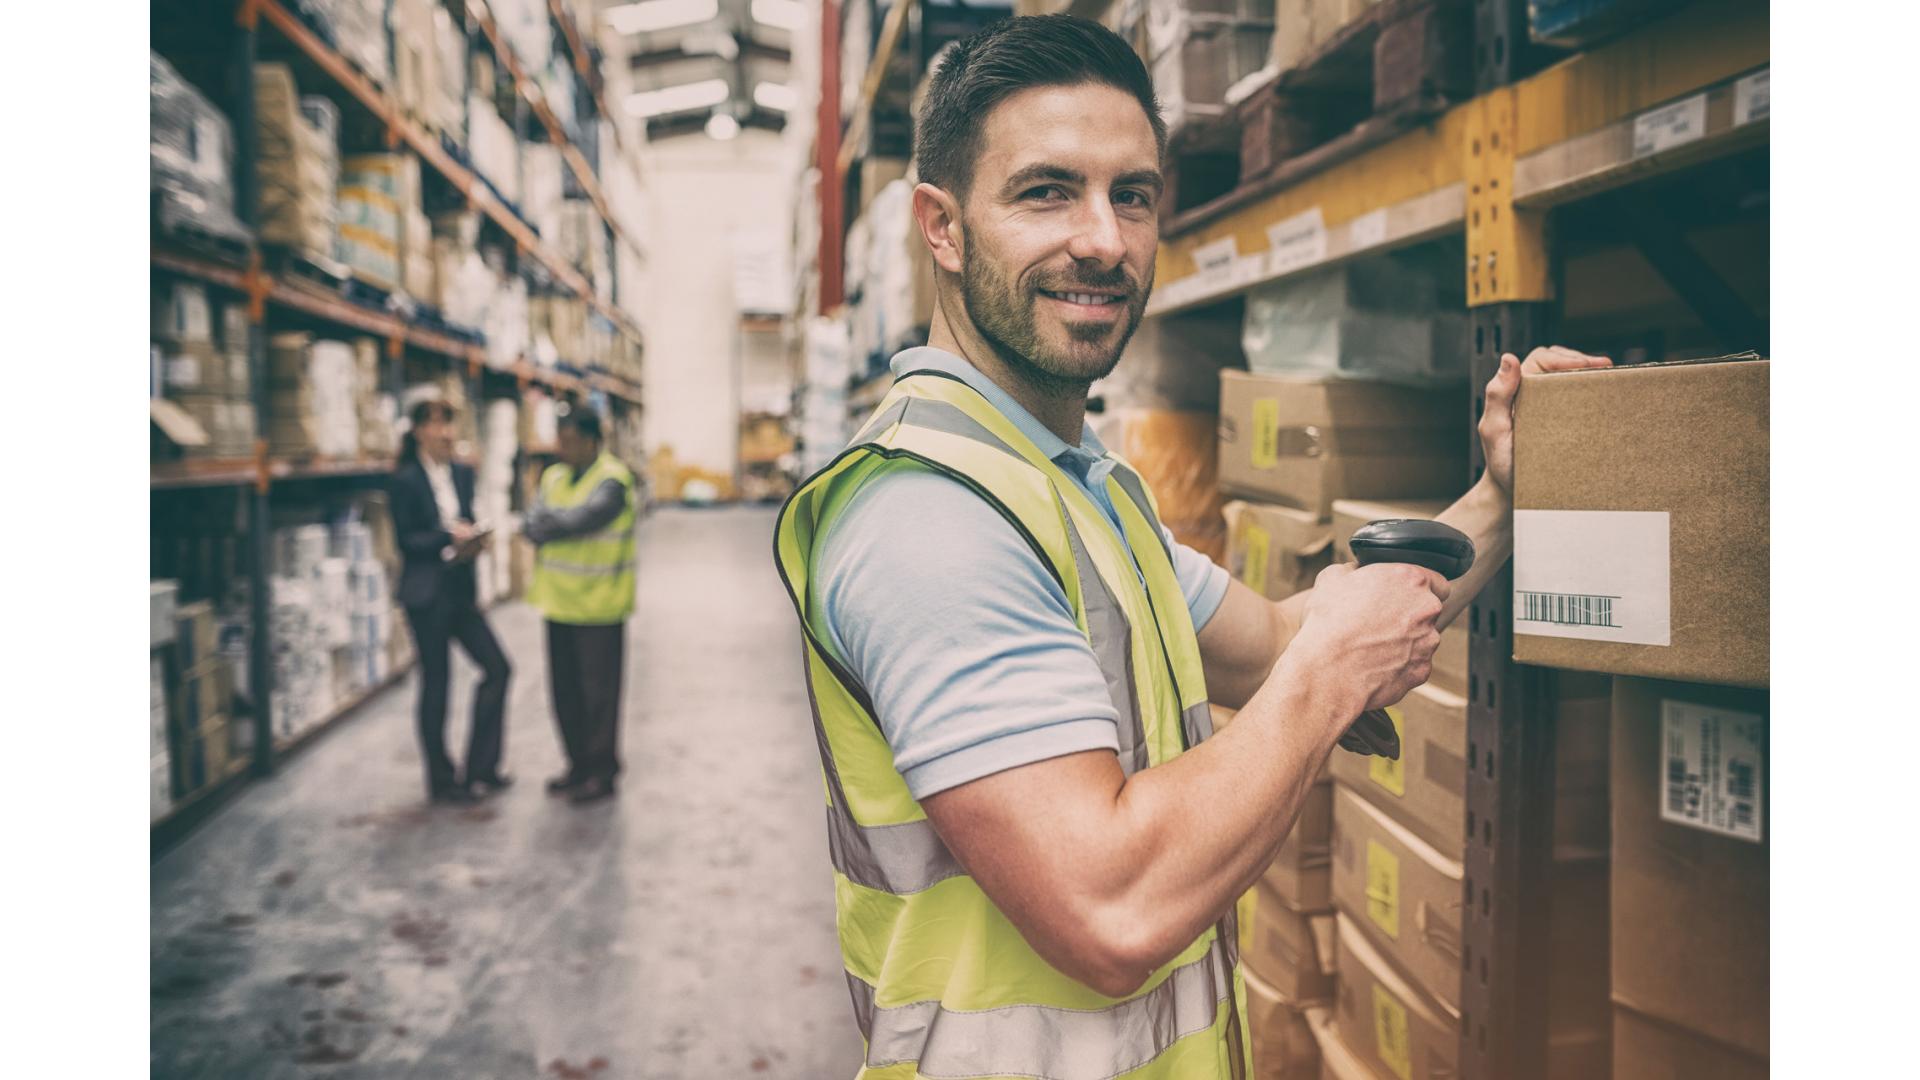 What Skills Do You Need For a Warehouse Job in Mississauga, Brampton, Peel Region, and the GTA?